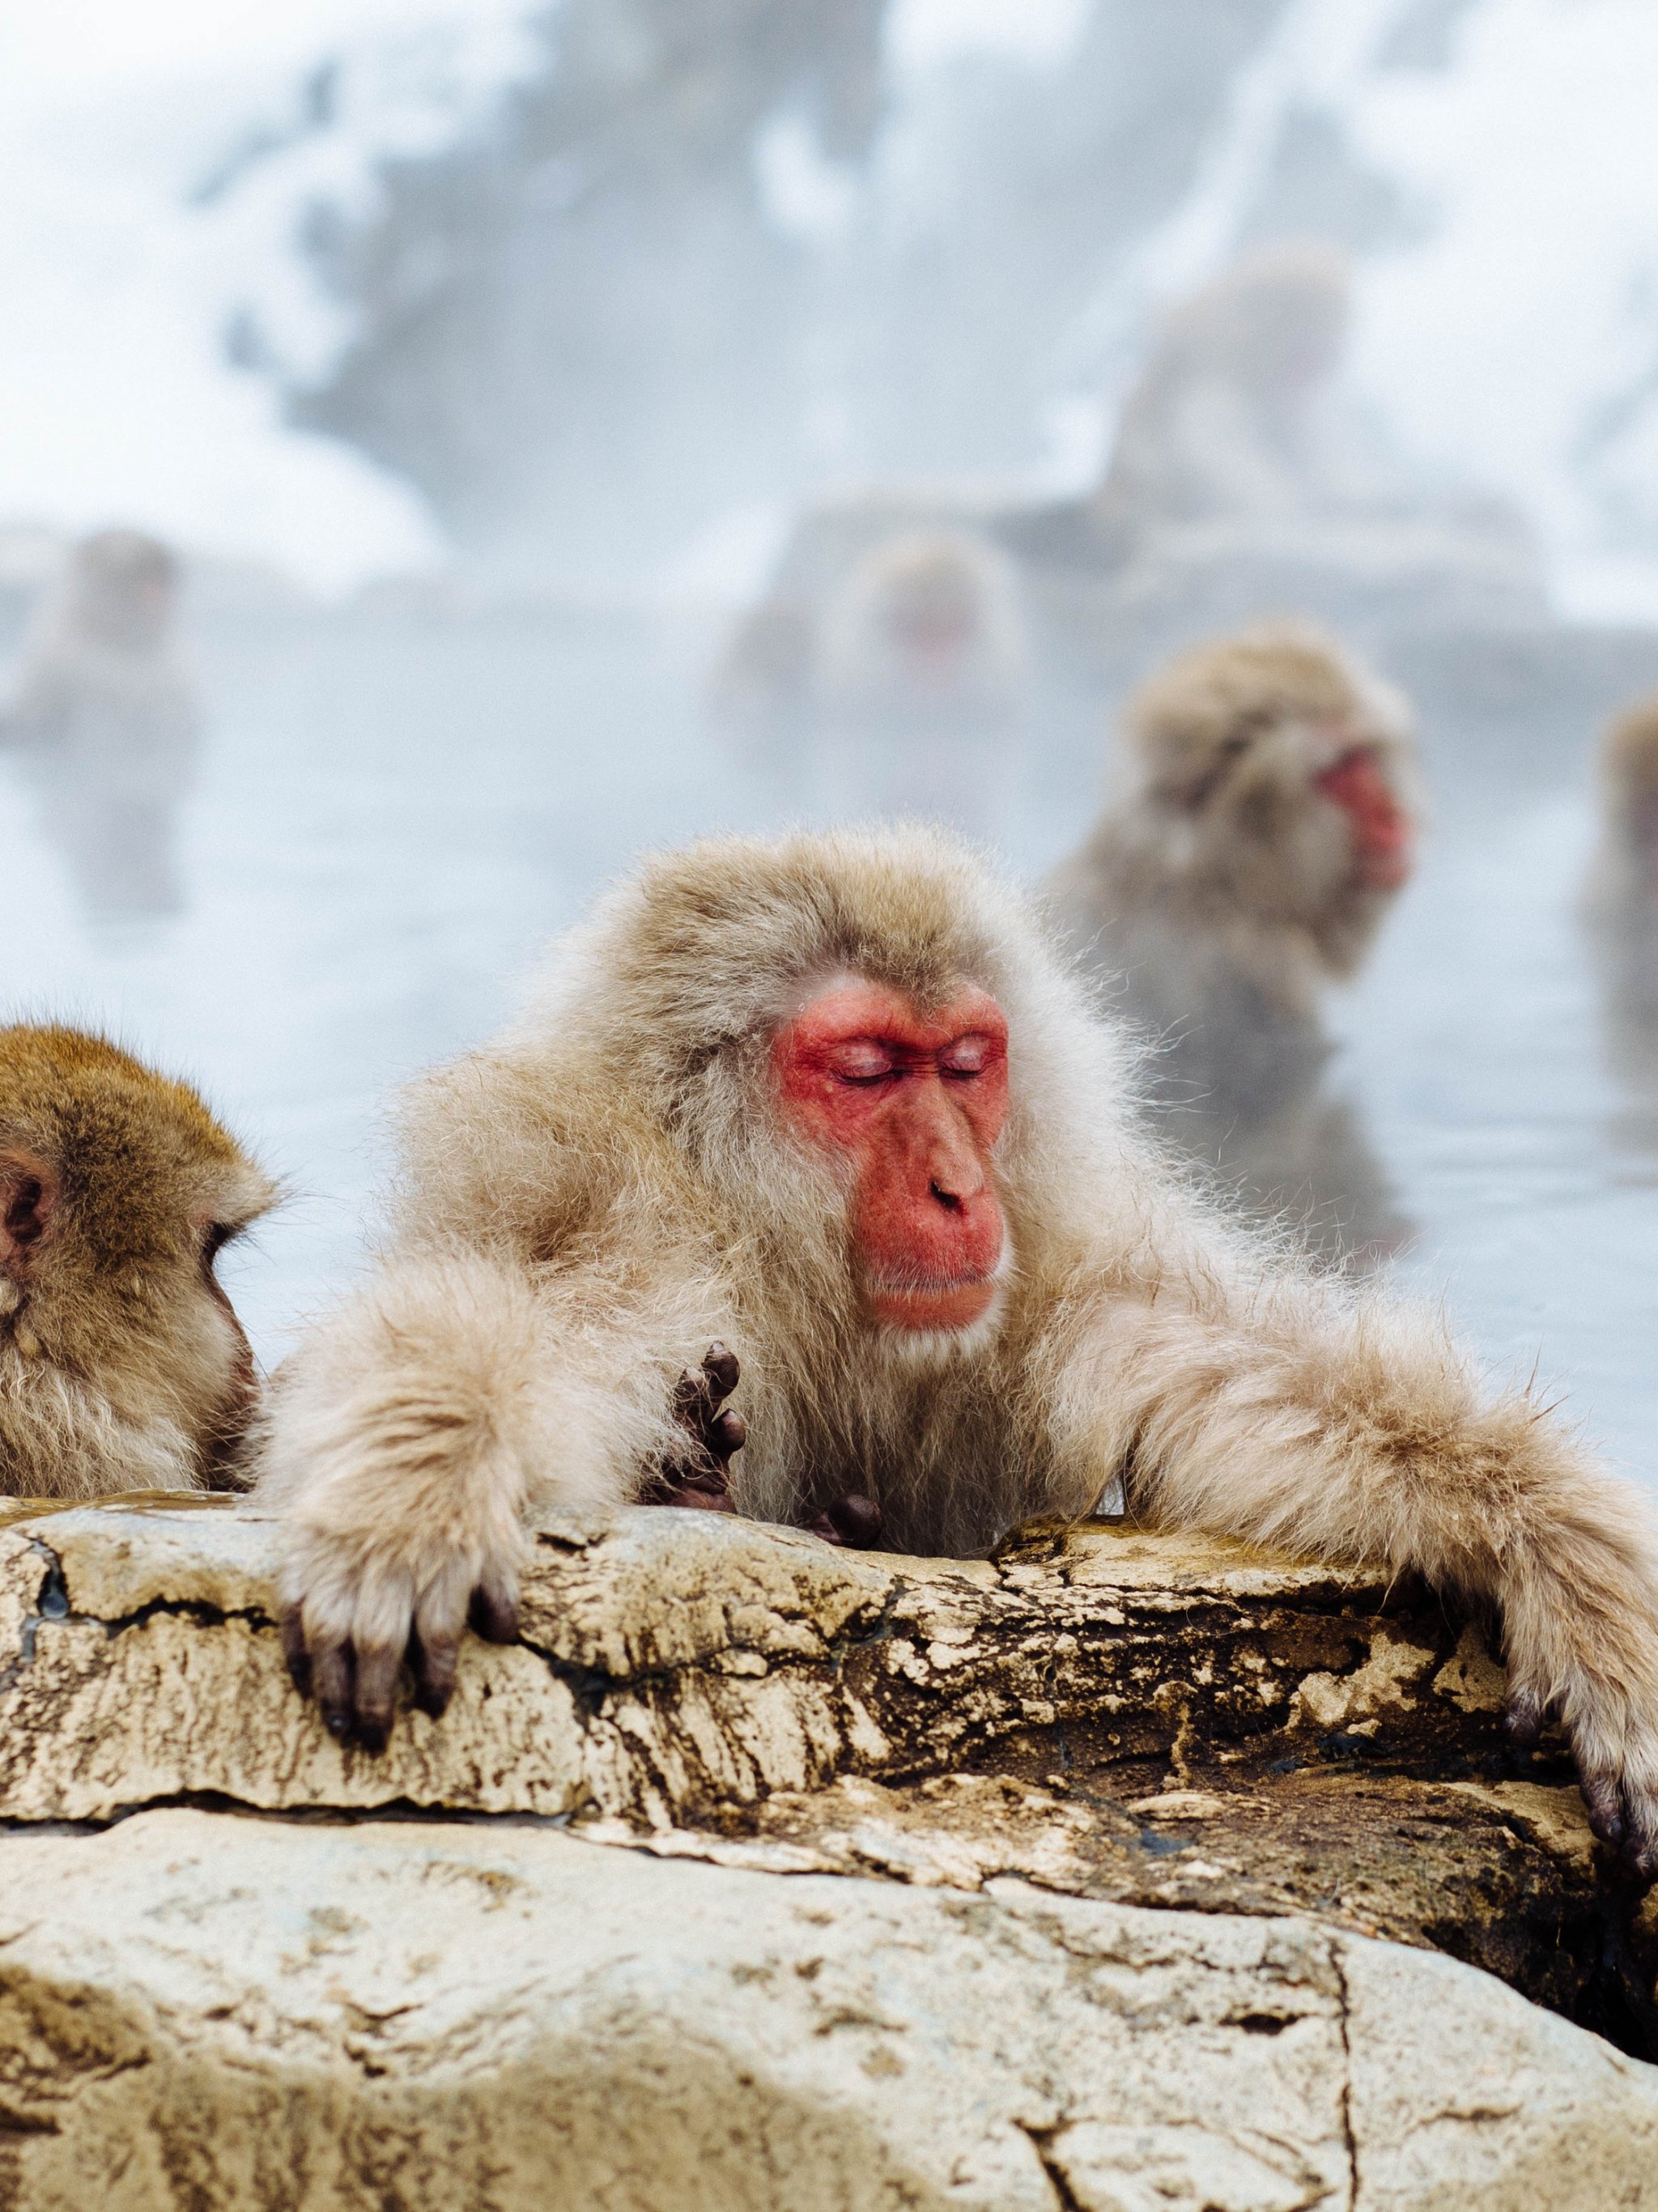 Snow Monkey Wallpaper  iPhone Android  Desktop Backgrounds